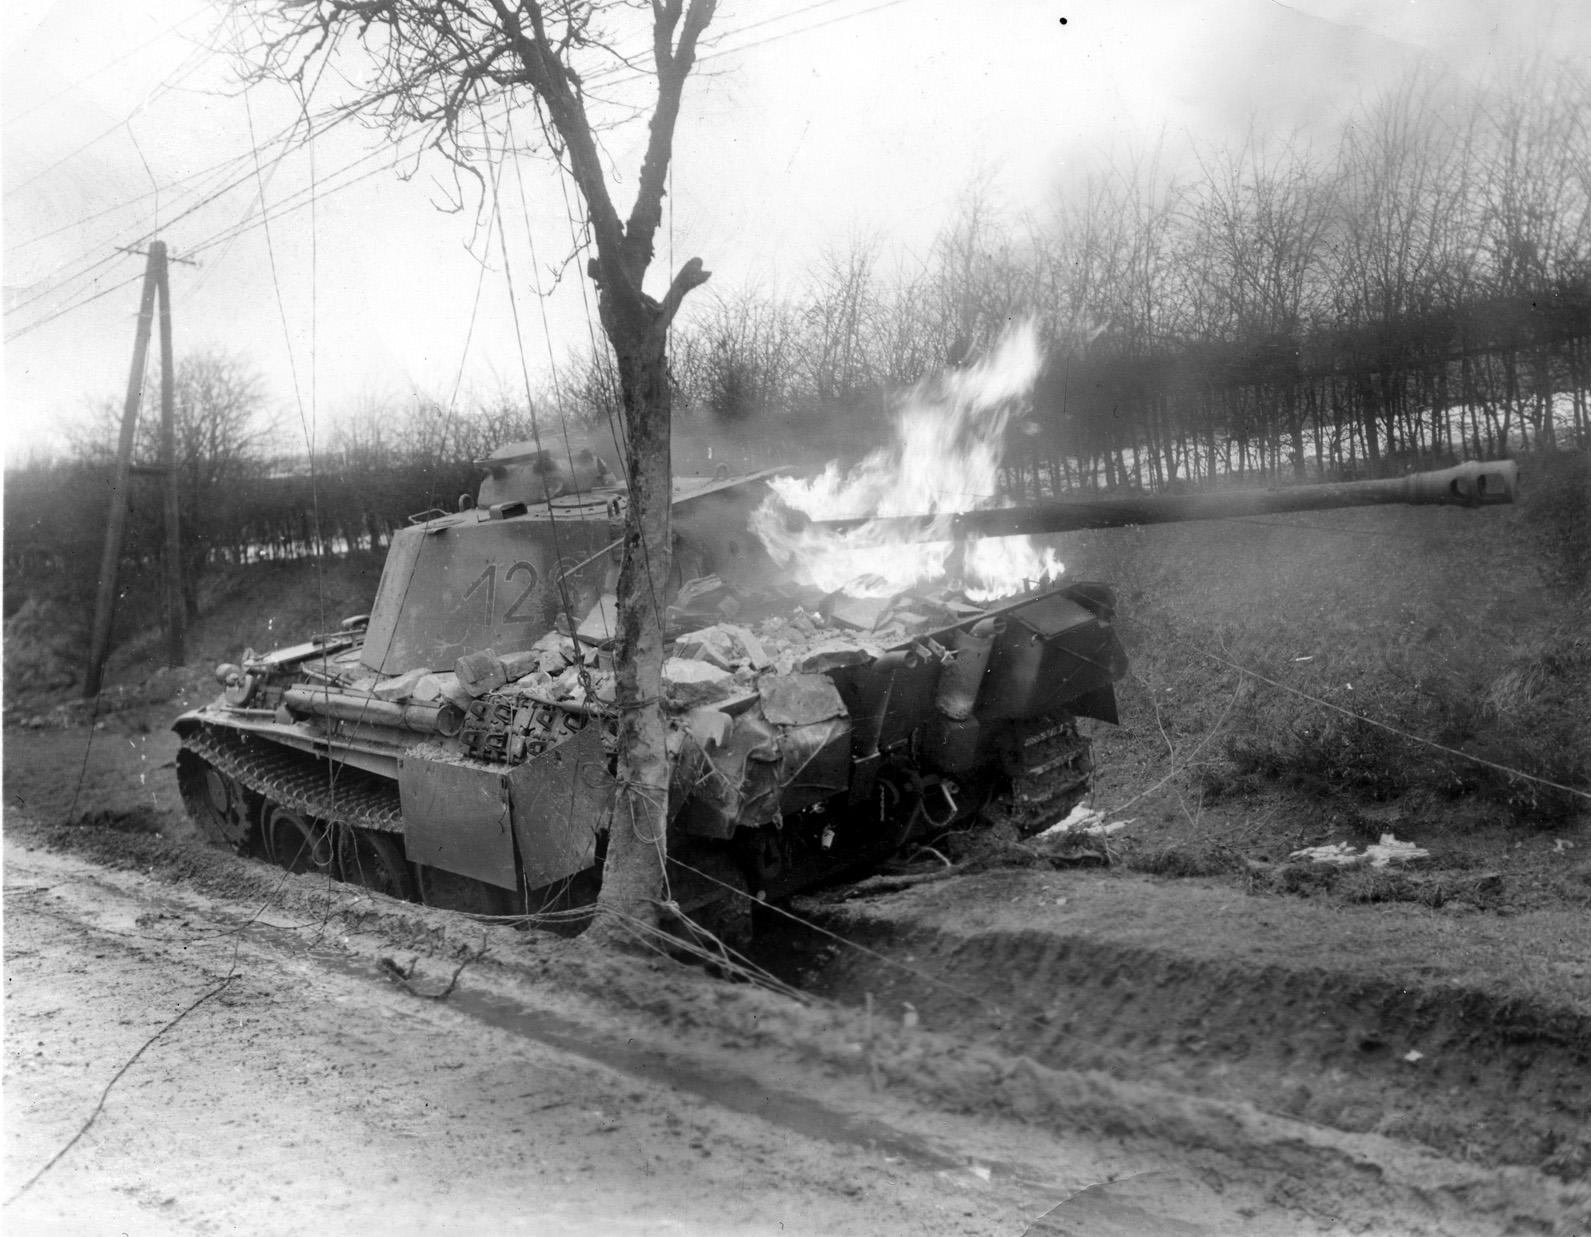 A German PzKpfw. V Panther medium tank, its long-barreled 75mm main gun jutting from the turret, blazes after being knocked out in combat in the vicinity of Bastogne, the vital Belgian crossroads town that played a pivotal role in the Battle of the Bulge. 